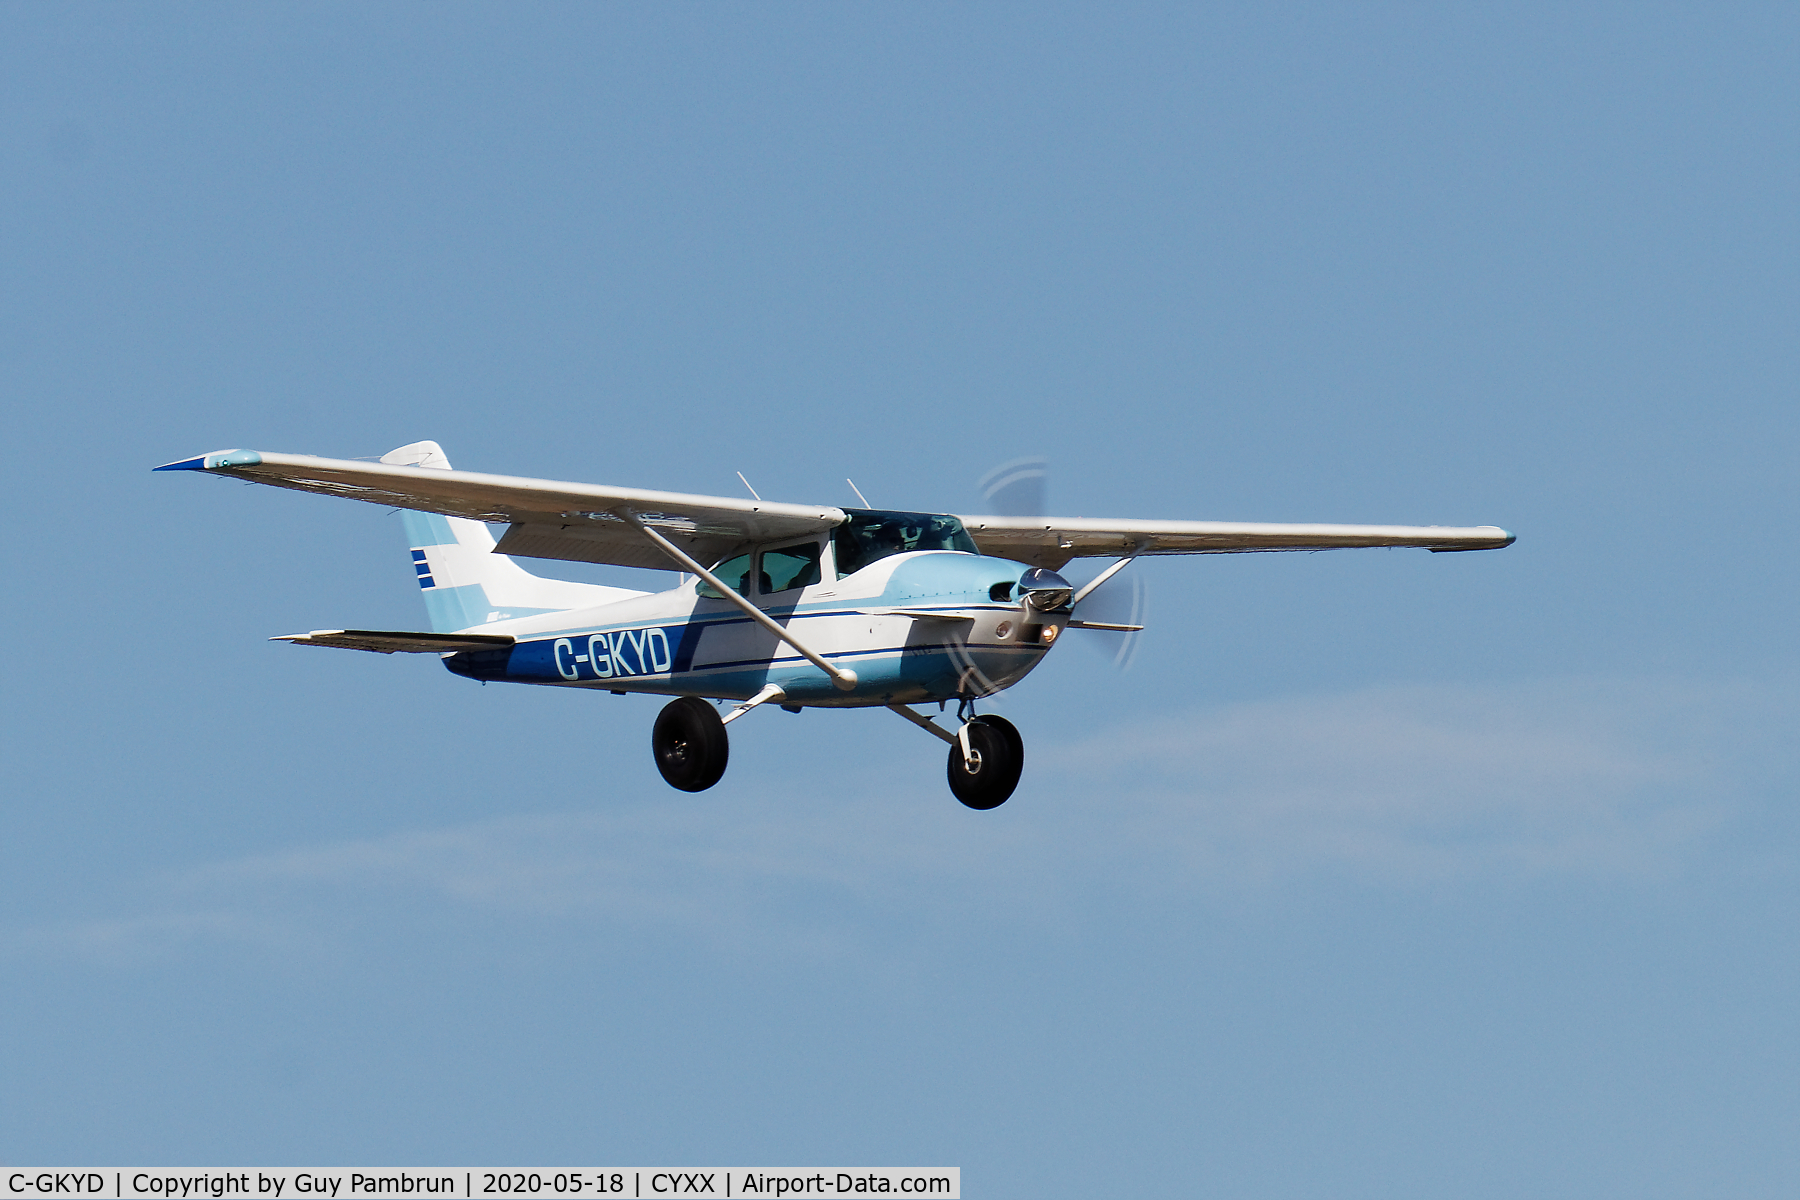 C-GKYD, 1976 Cessna 182P Skylane C/N 18264520, Landing on 19 for pilot briefing and departure to take part in 